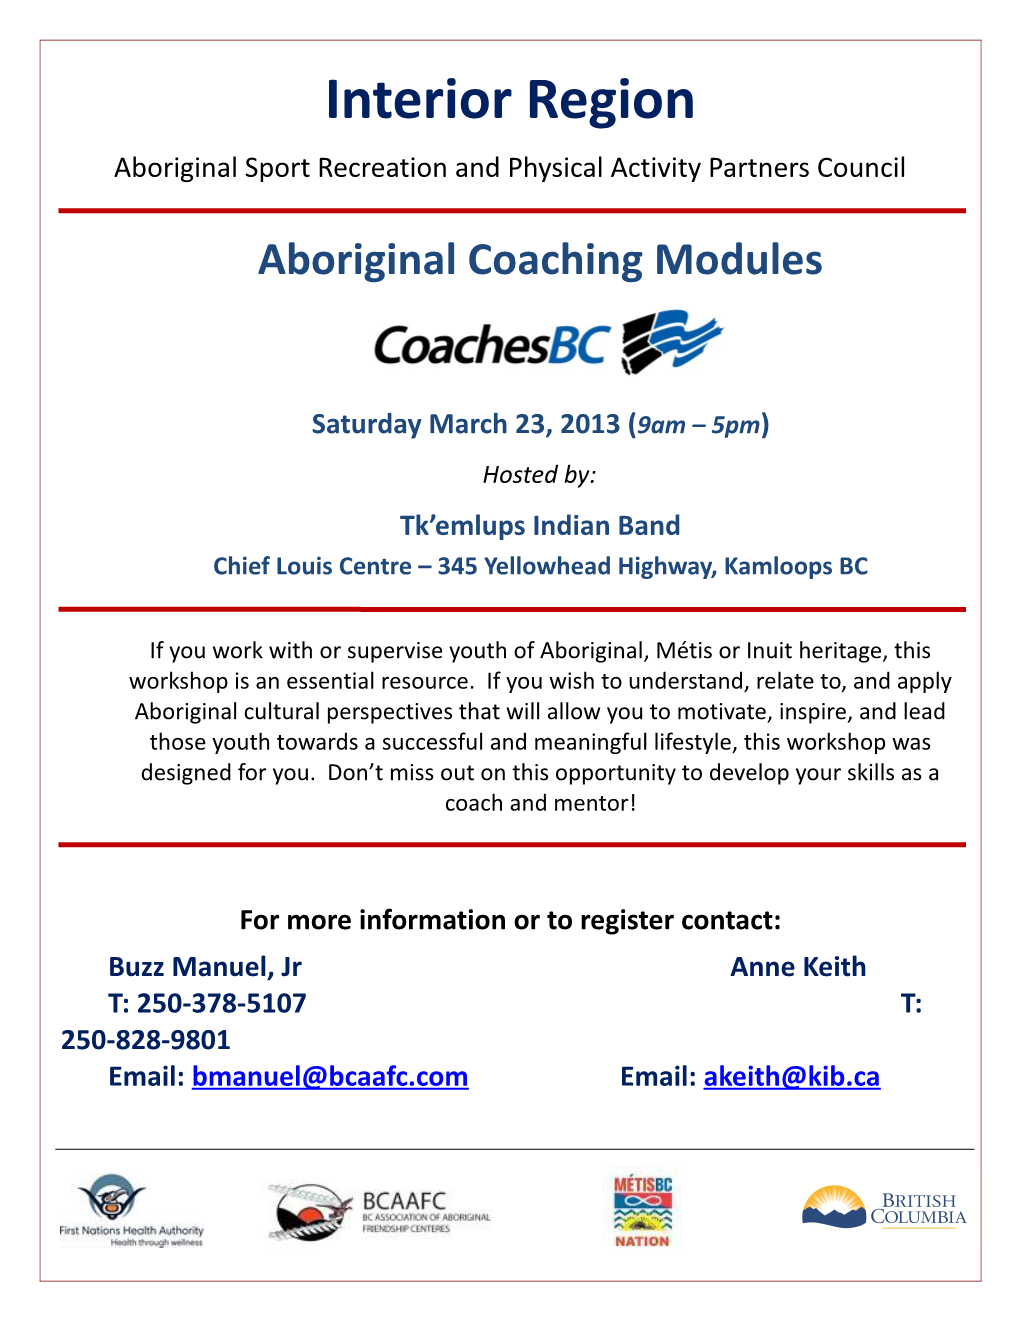 Aboriginal Sport Recreation and Physical Activity Partners Council